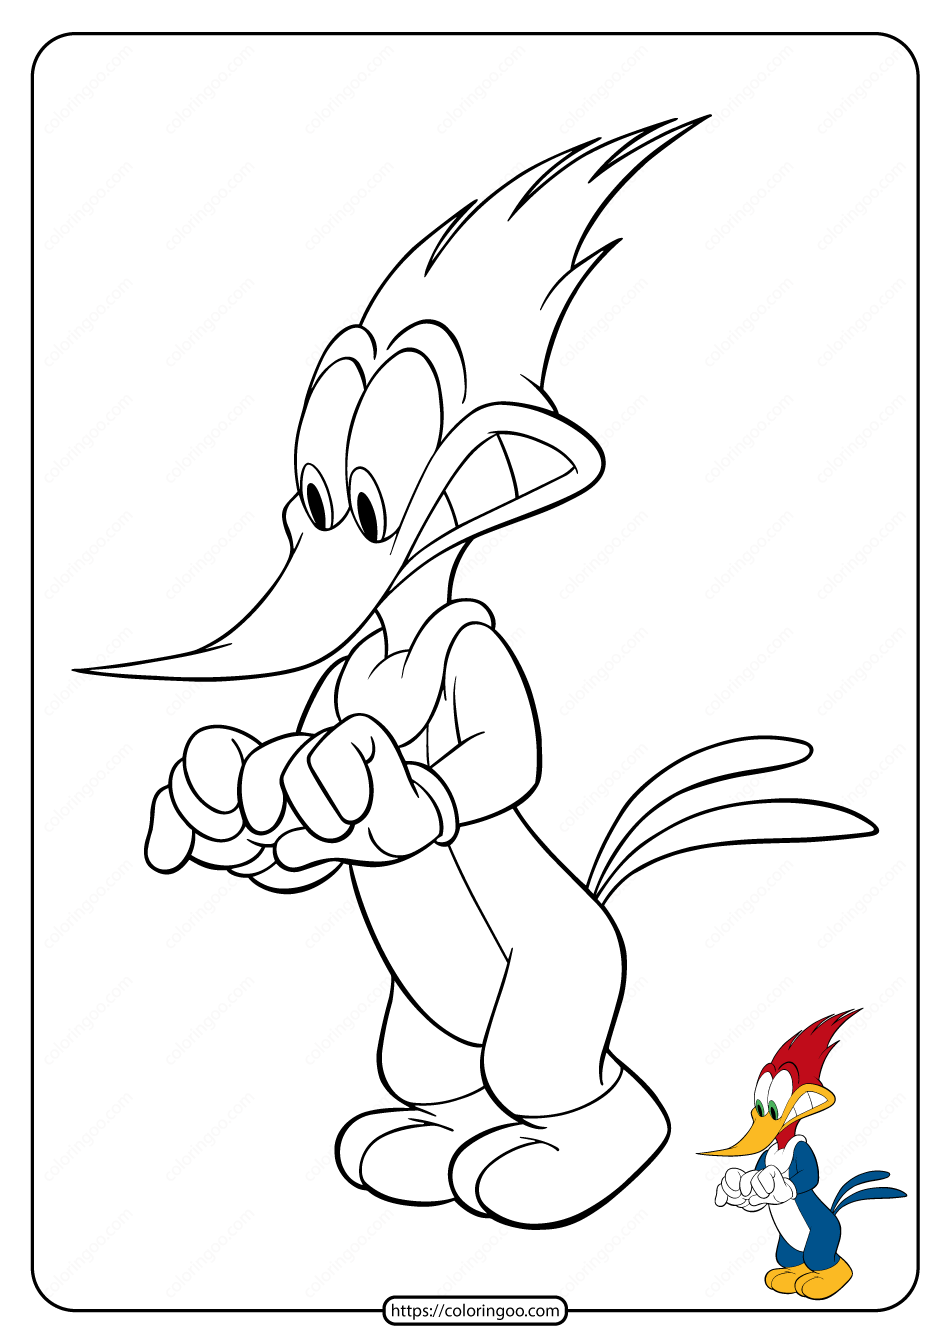 Woody Is A Woodpecker Coloring Pages